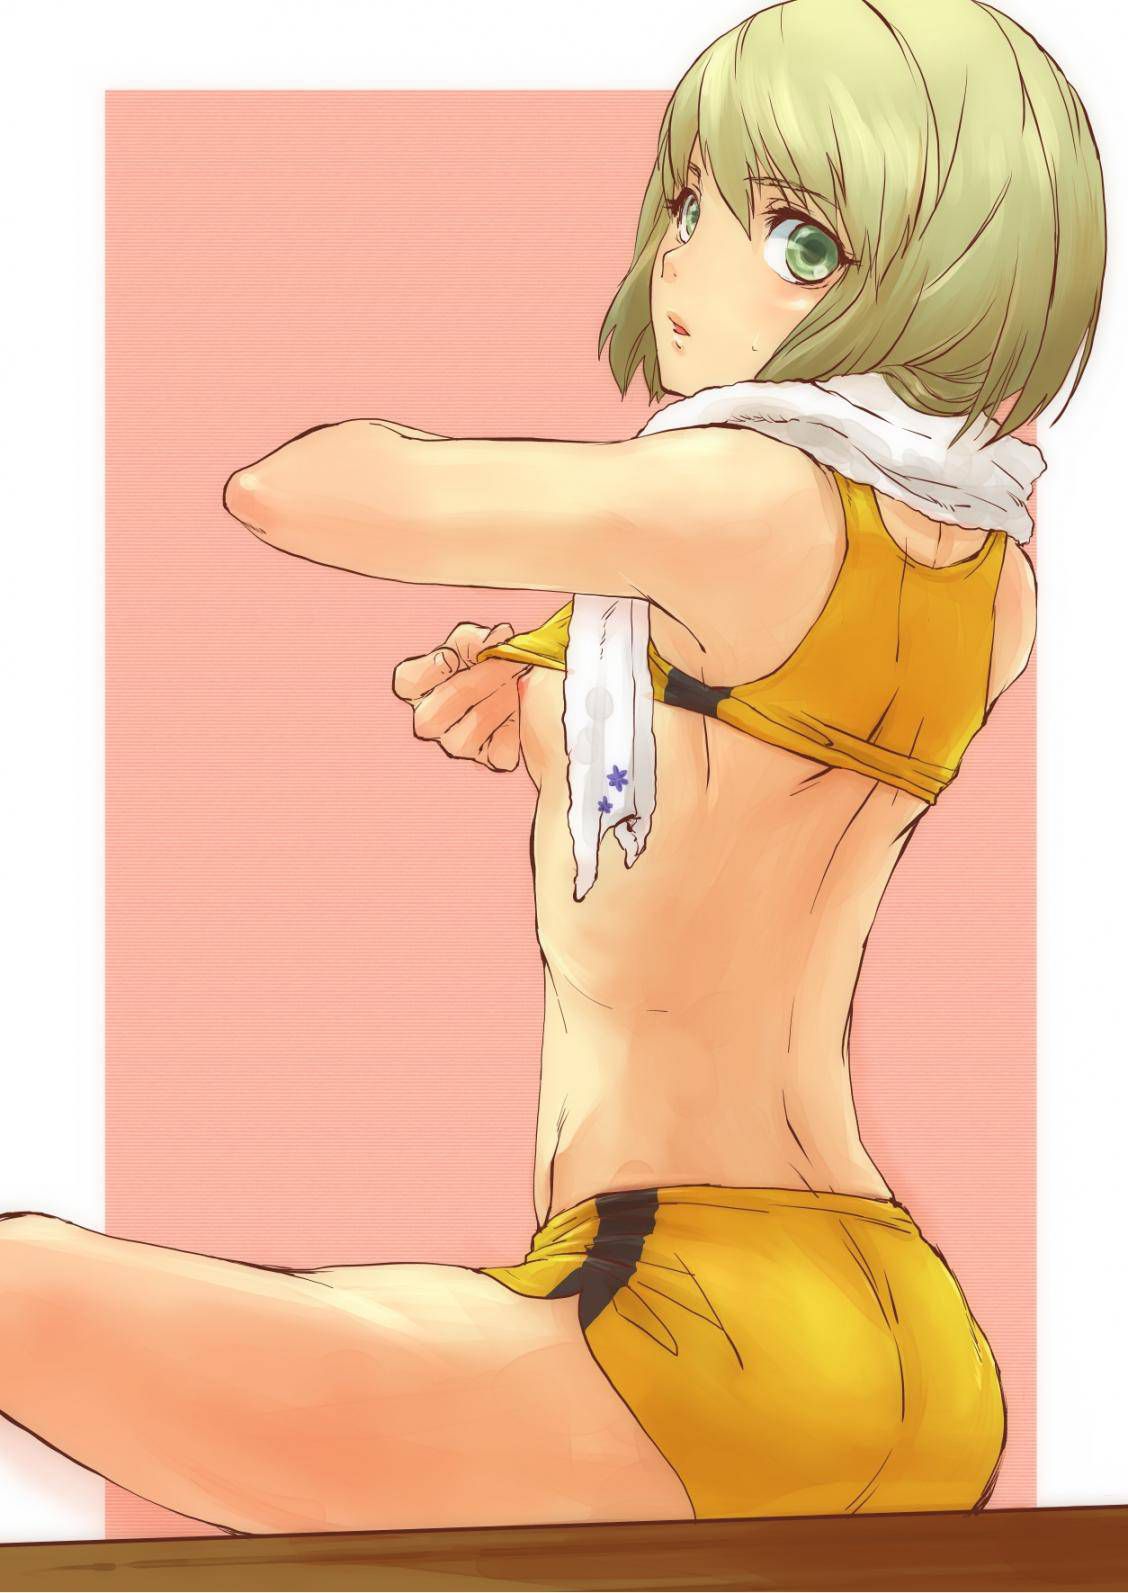 Erotic anime summary erotic image of a girl with a body line where sportswear is too much [secondary erotic] 13